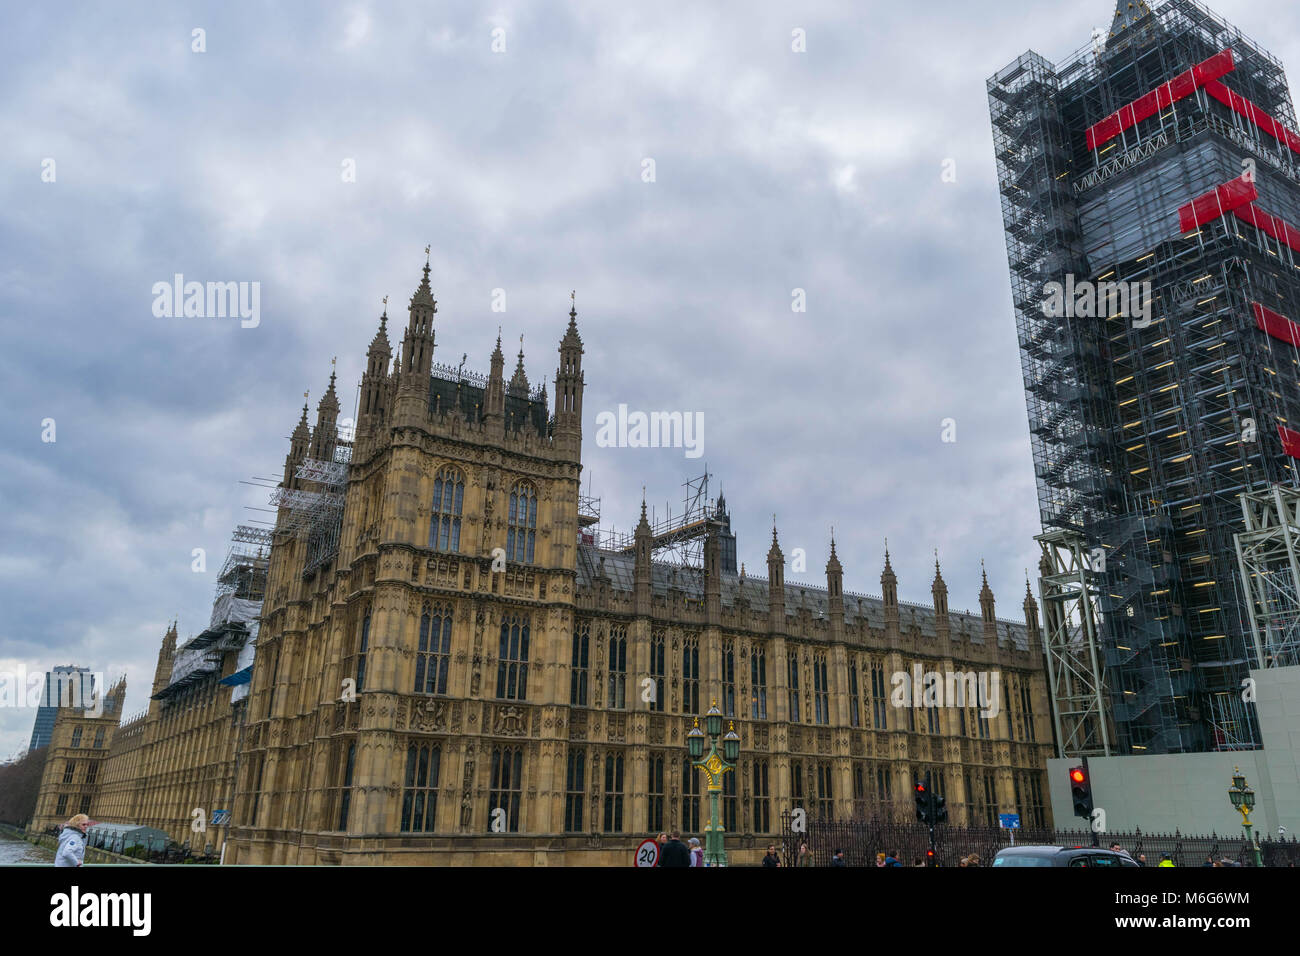 London, United Kingdom, February 17, 2018: Westminster bridge and big ben repain construction with the house of parliament in view, wintery skies Stock Photo